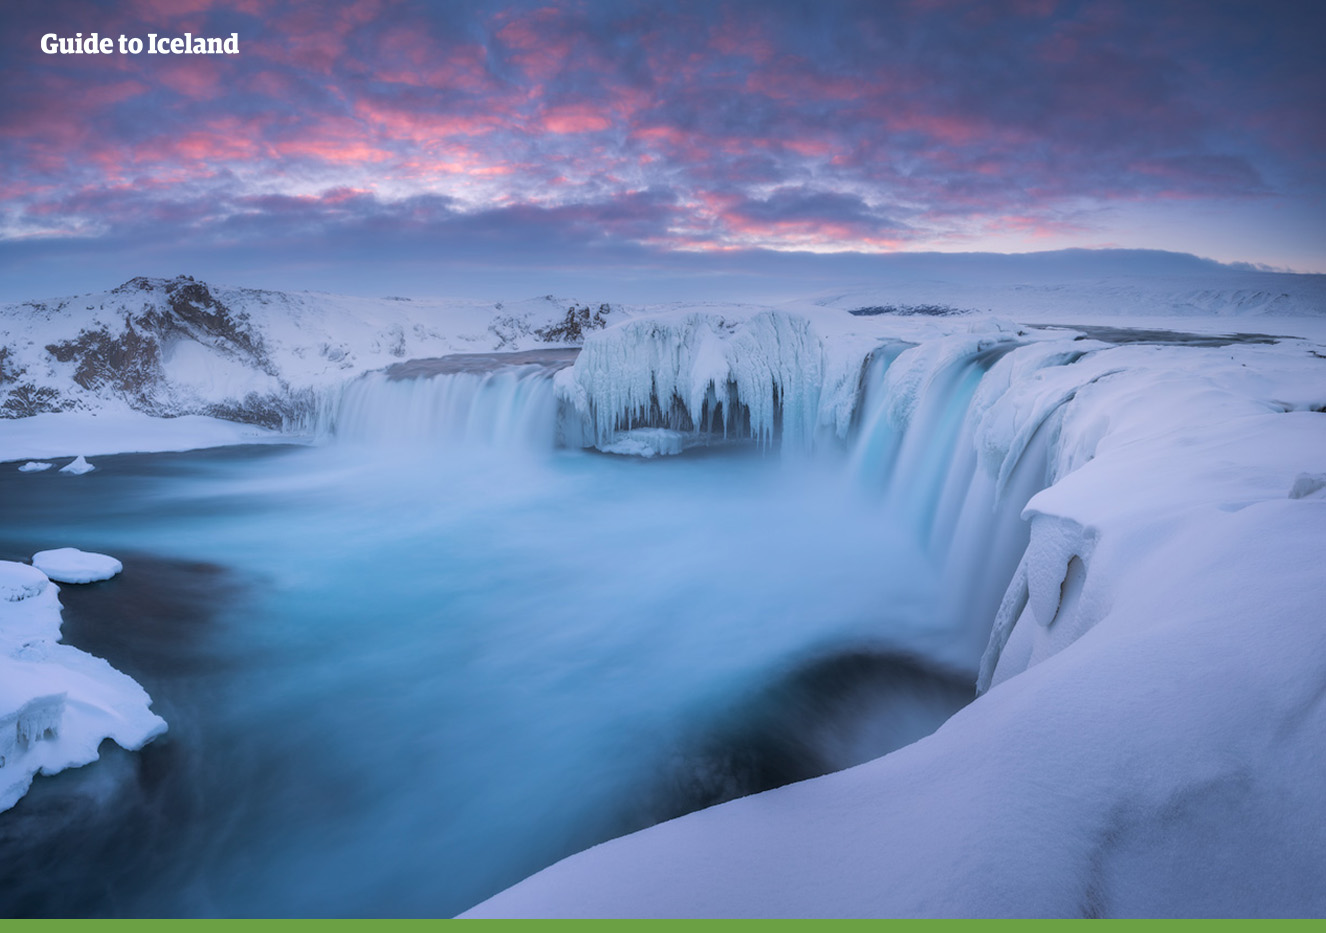 Goðafoss waterfall in North Iceland, bound in ice in high winter.